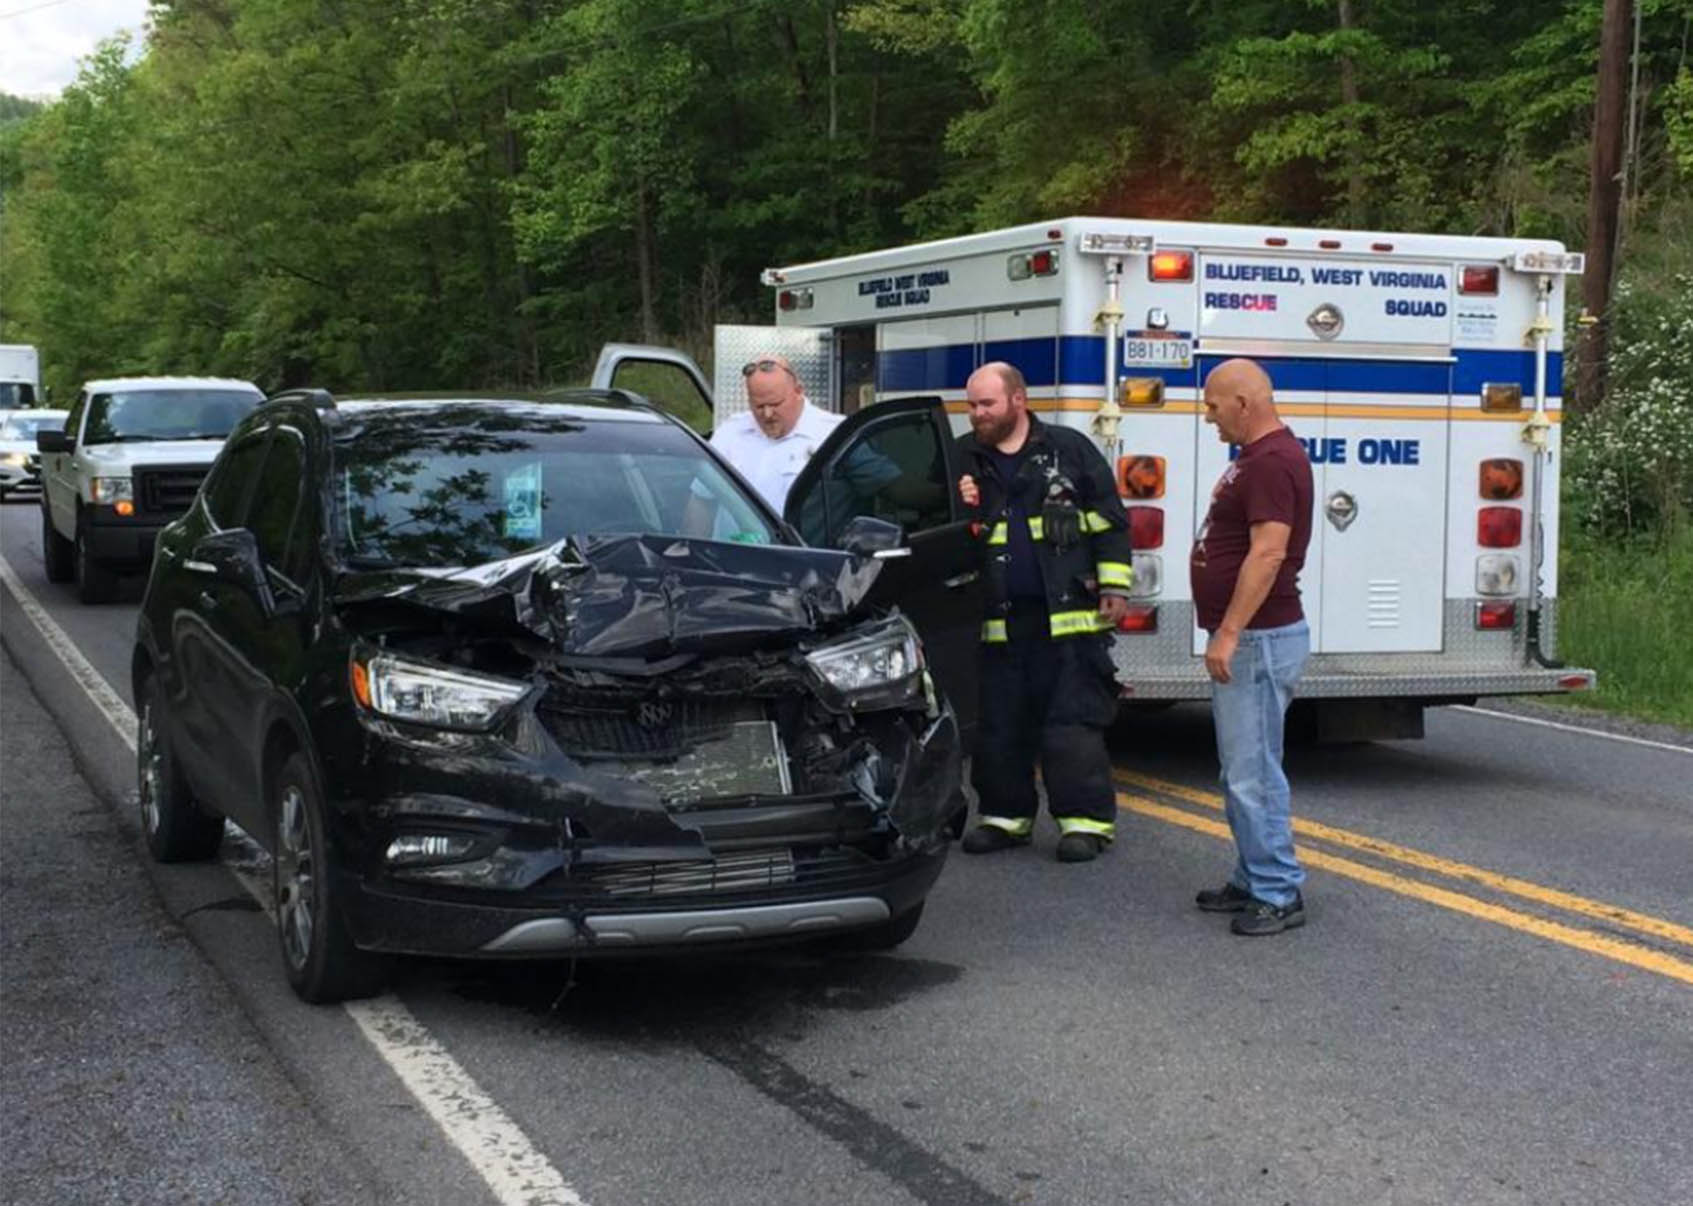 Bluefield rescue squad responding to car accident